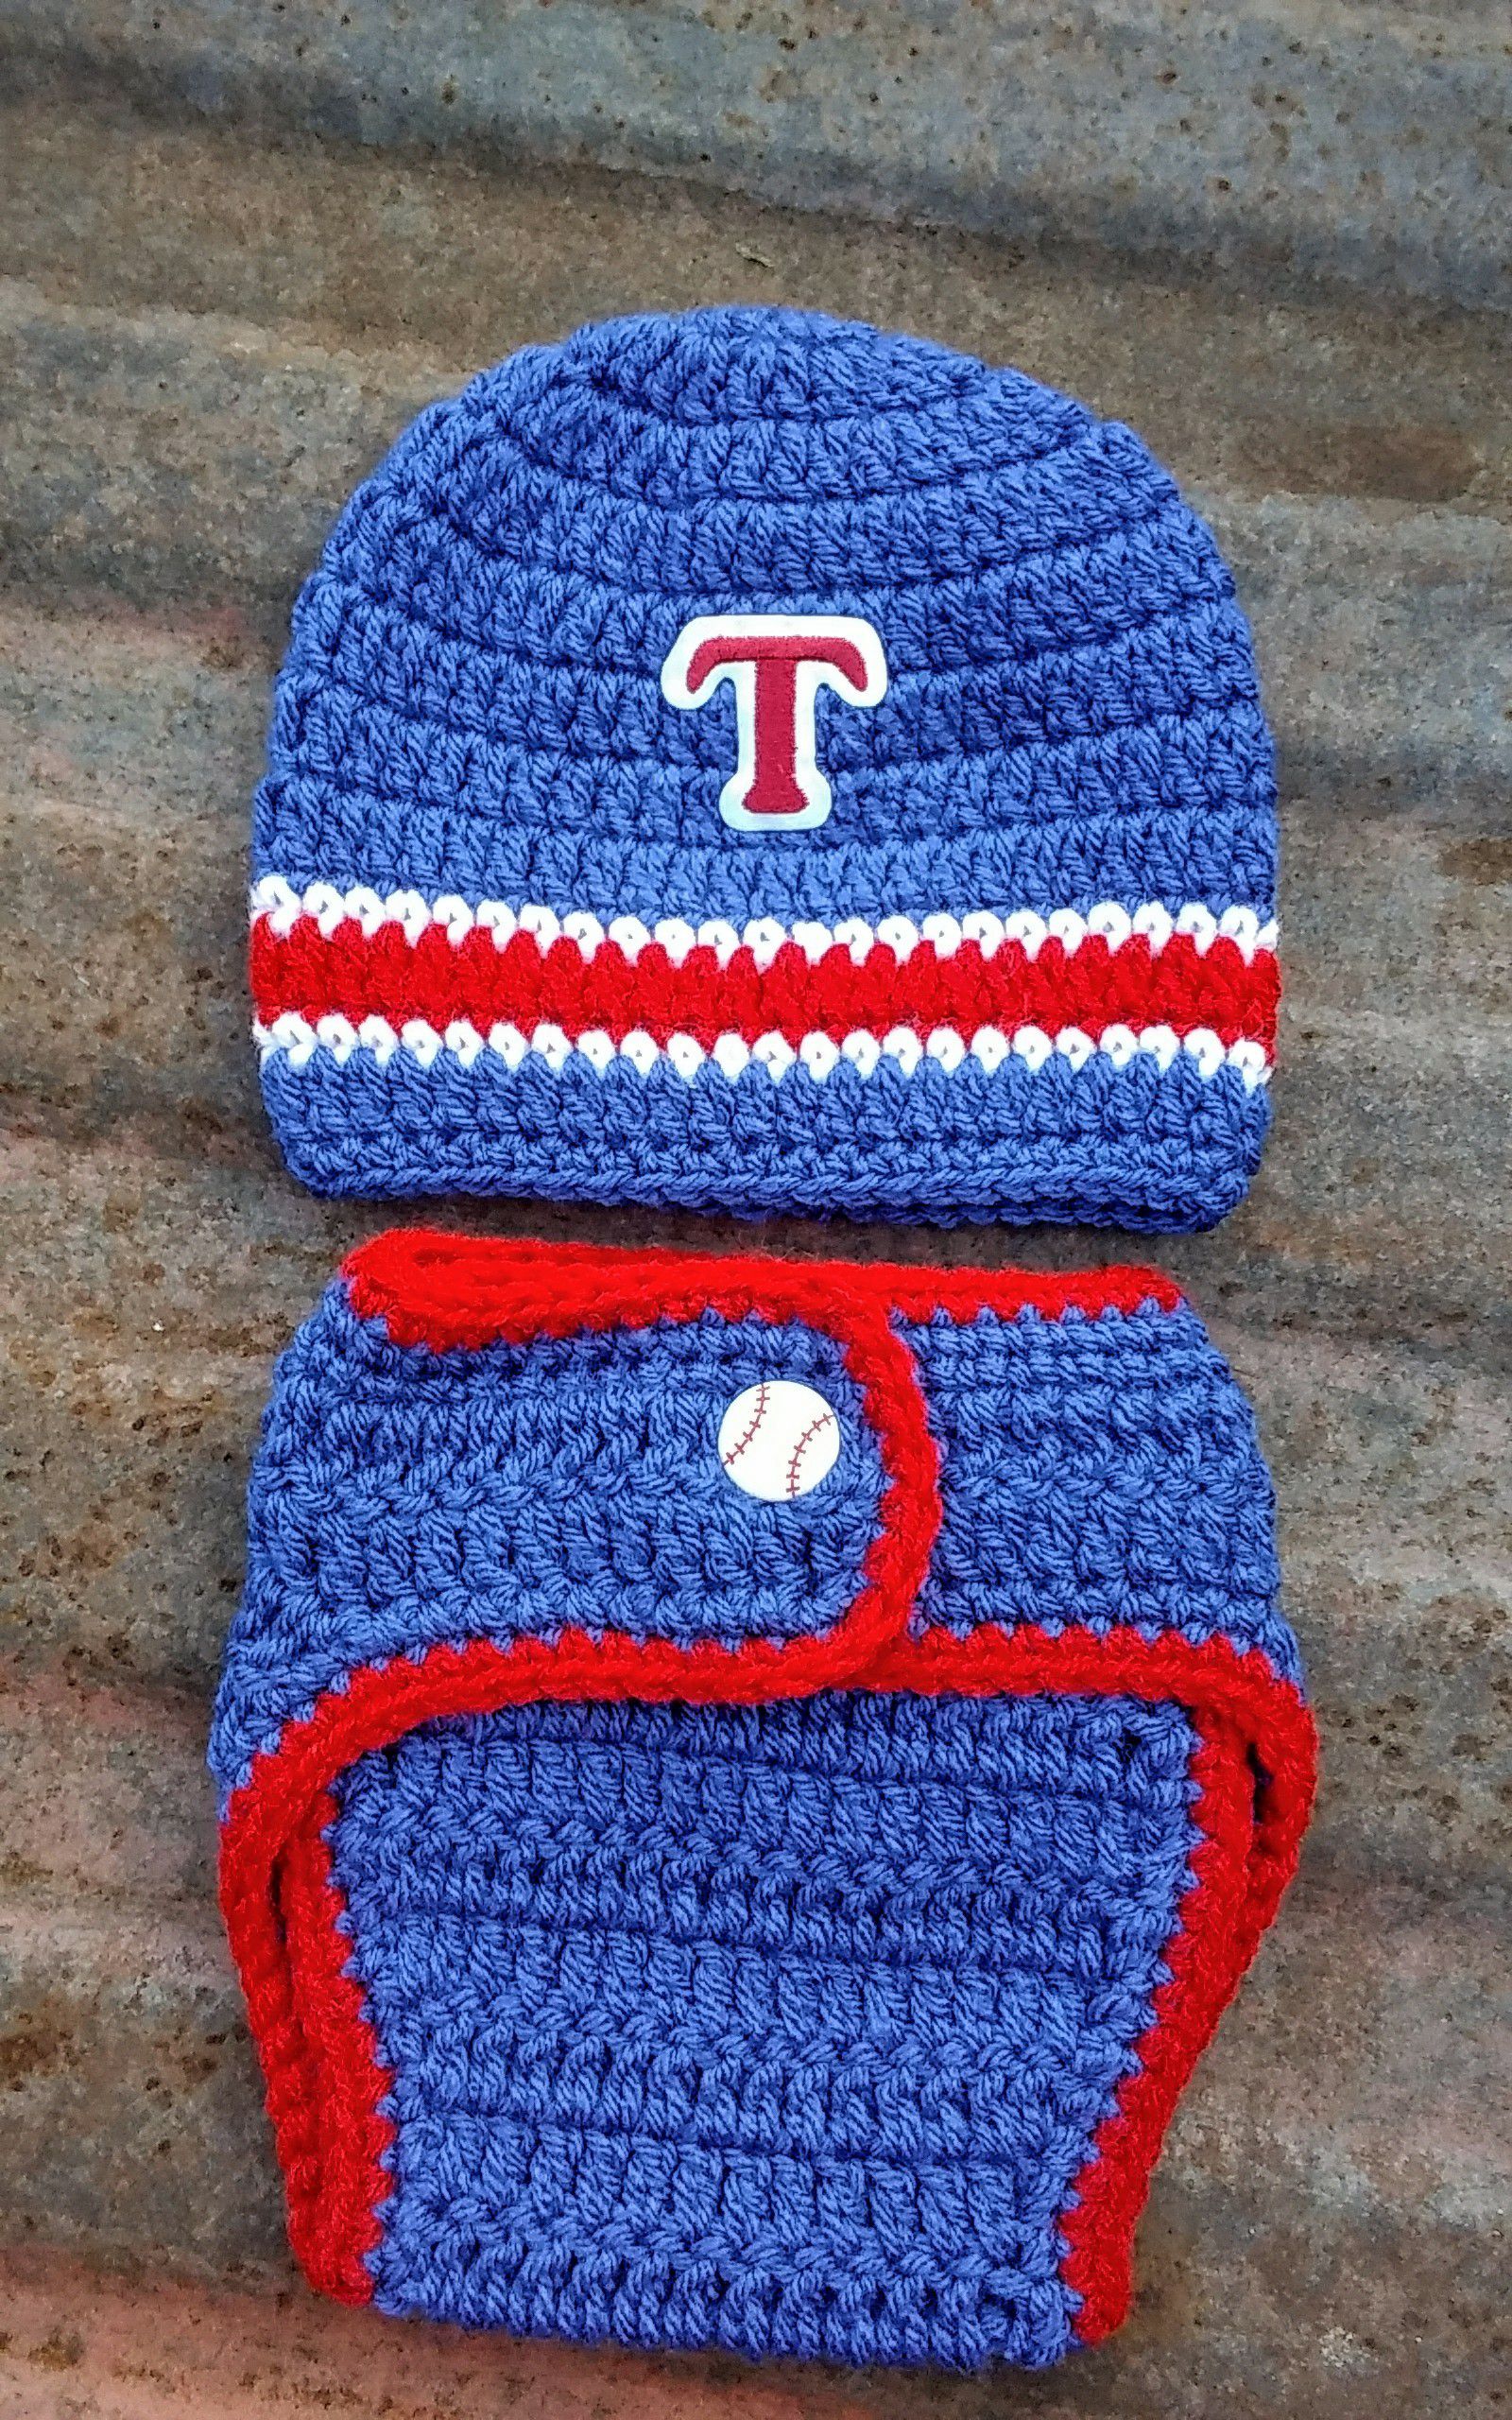 Handmade inspired by Texas ranger baby outfit.